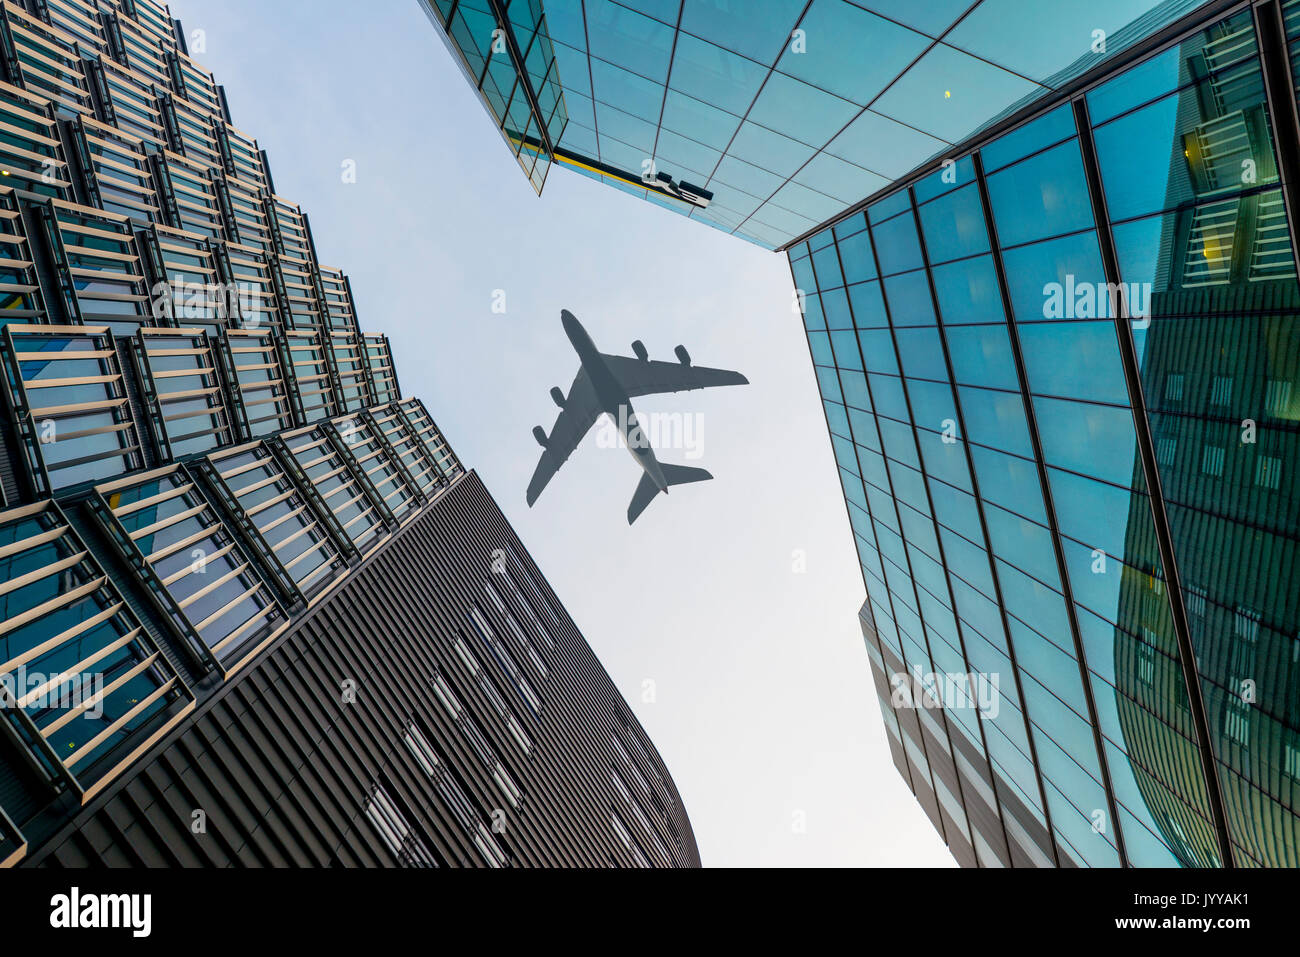 Airplane flying over skyscraper, low-angle view, London, England, United Kingdom Stock Photo